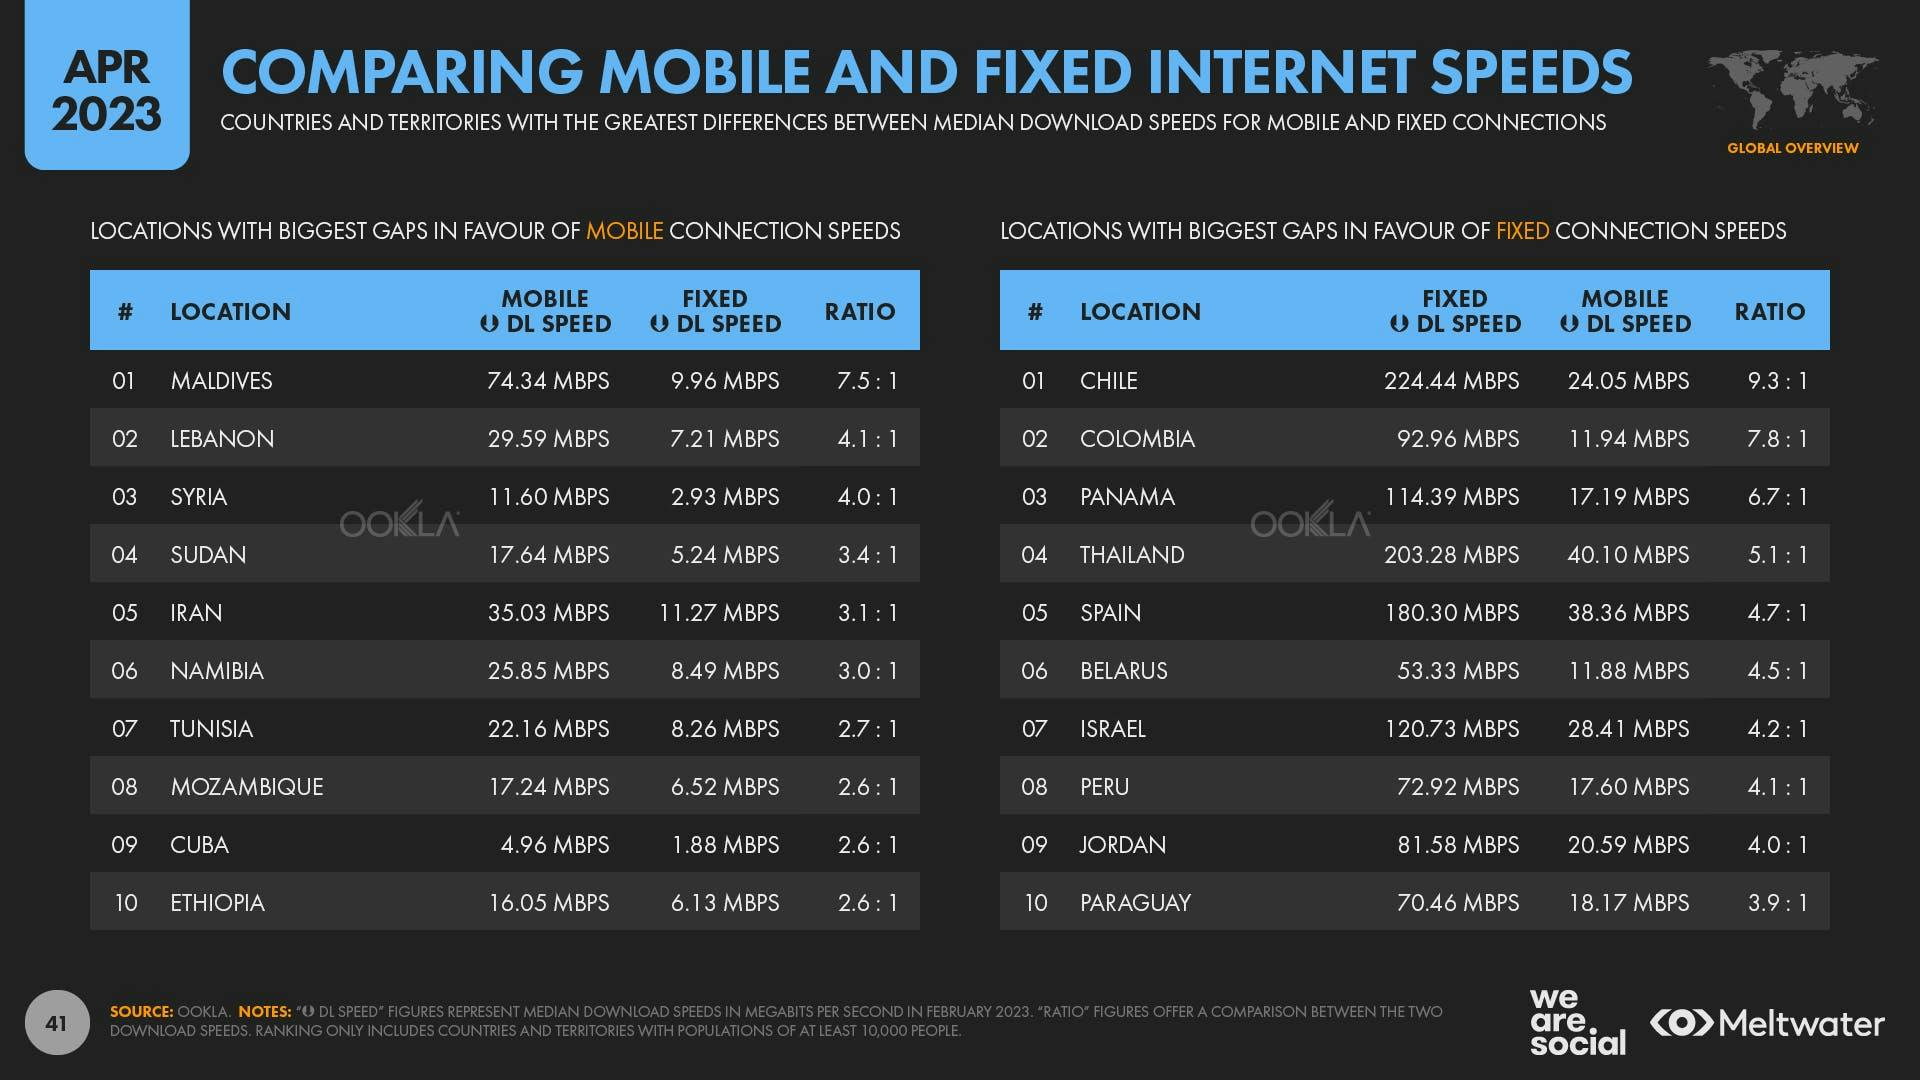 April 2023 Global State of Digital Report: Comparing Mobile and Fixed Internet Speeds